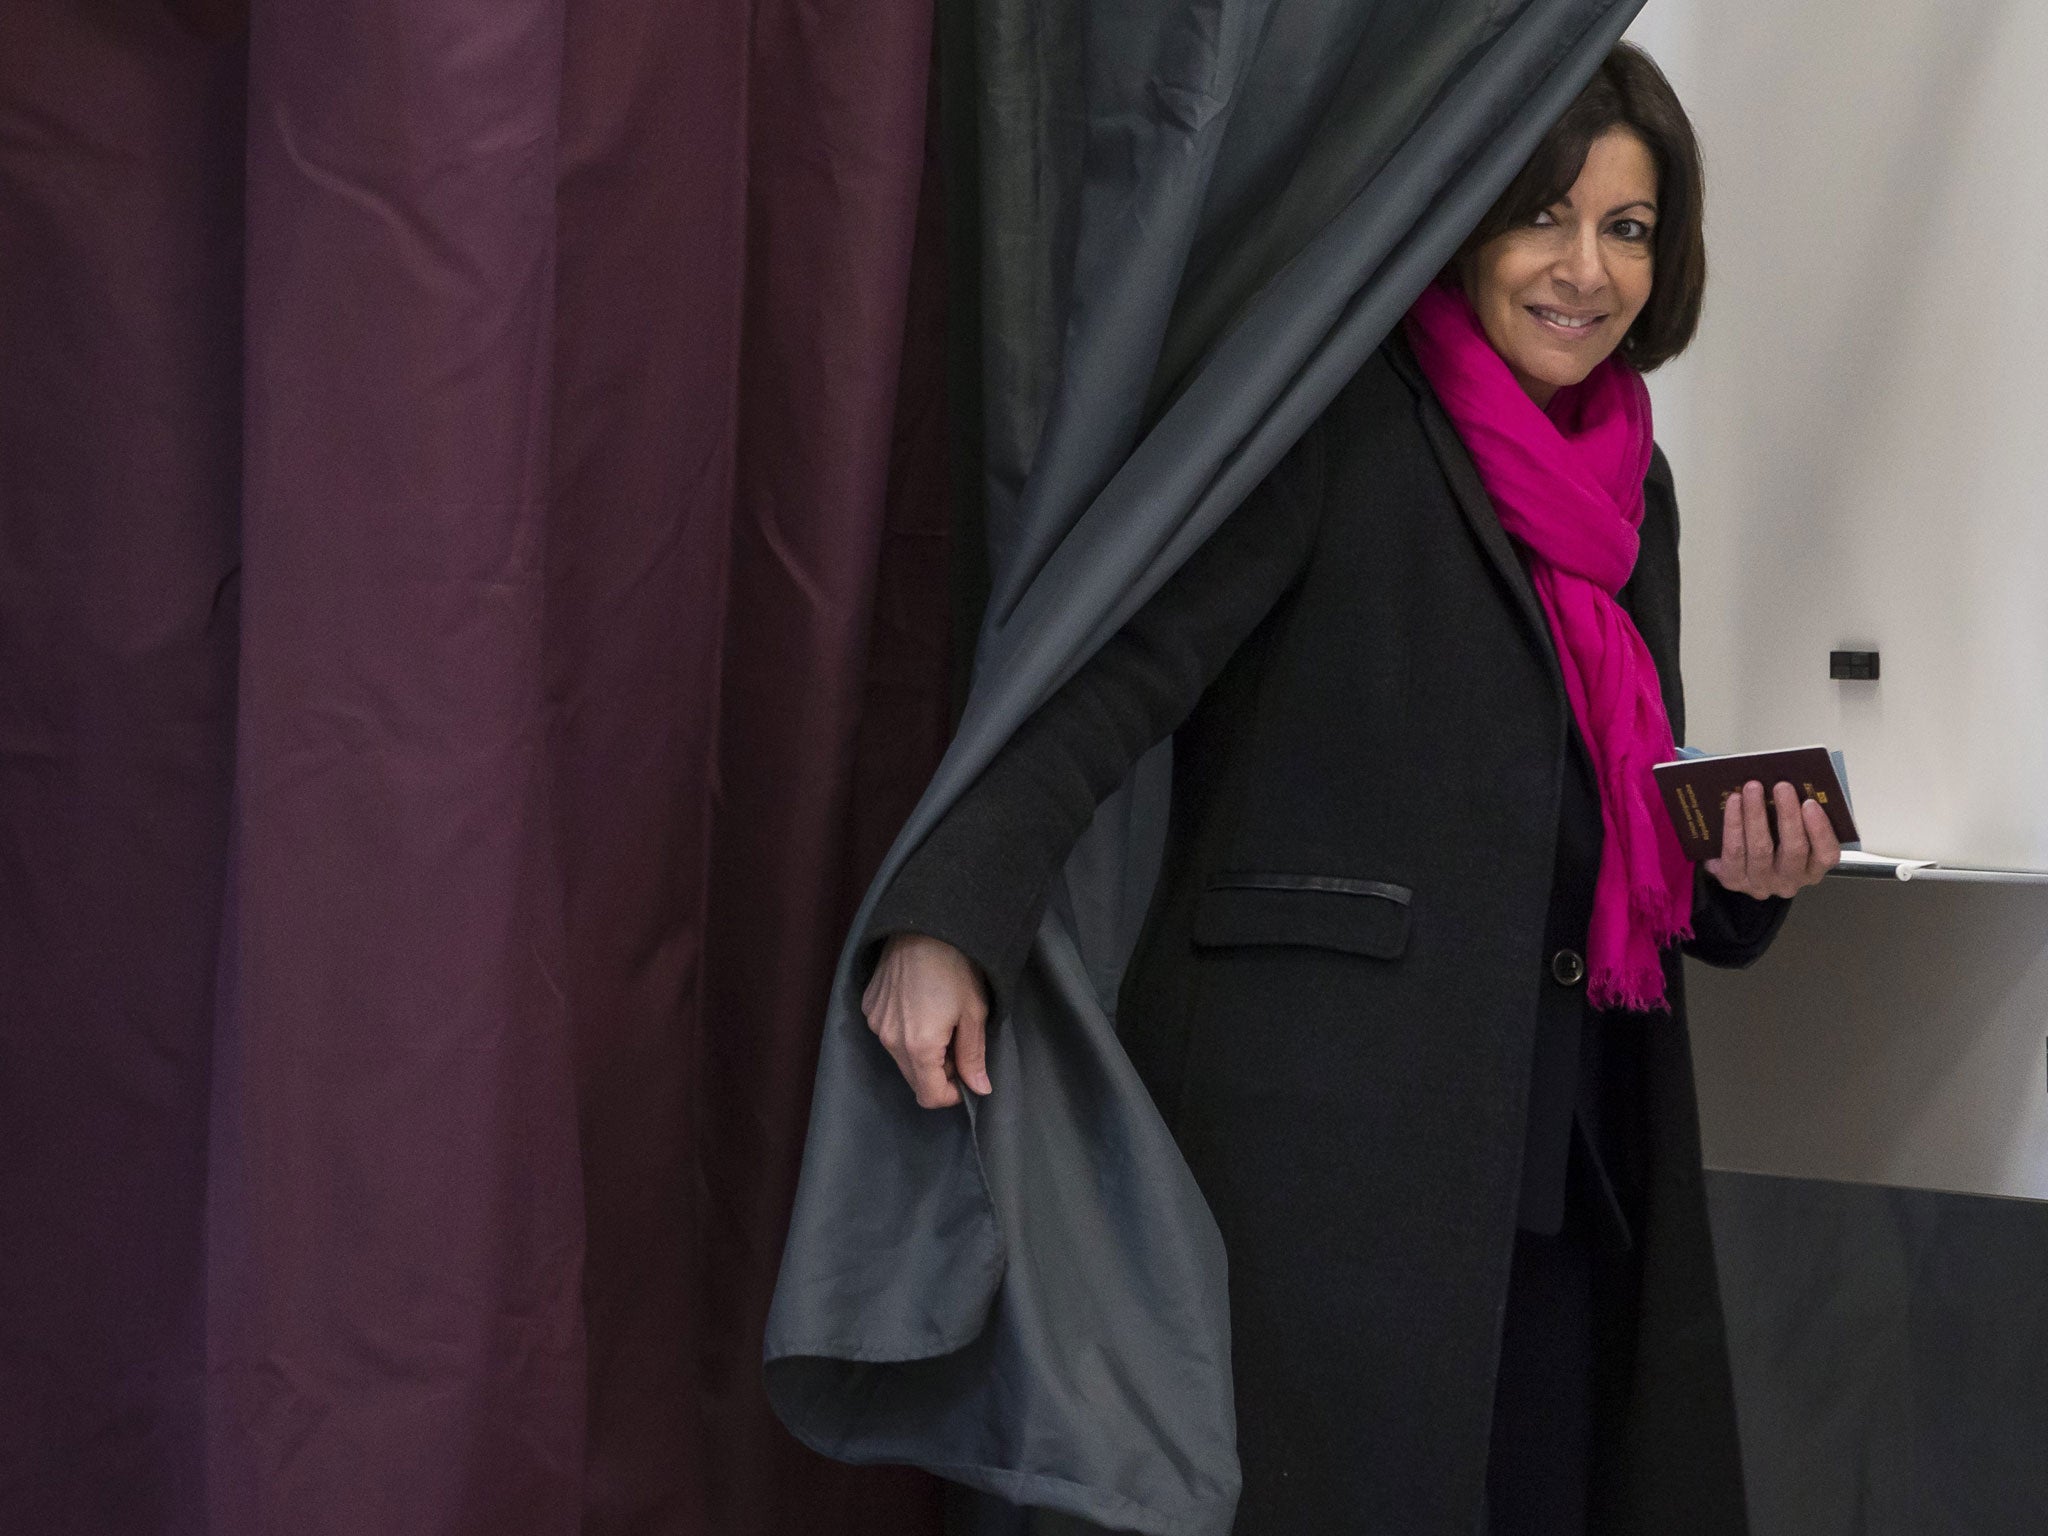 A Socialist party candidate, Anne Hidalgo, was last night leading the race to become the next mayor of Paris